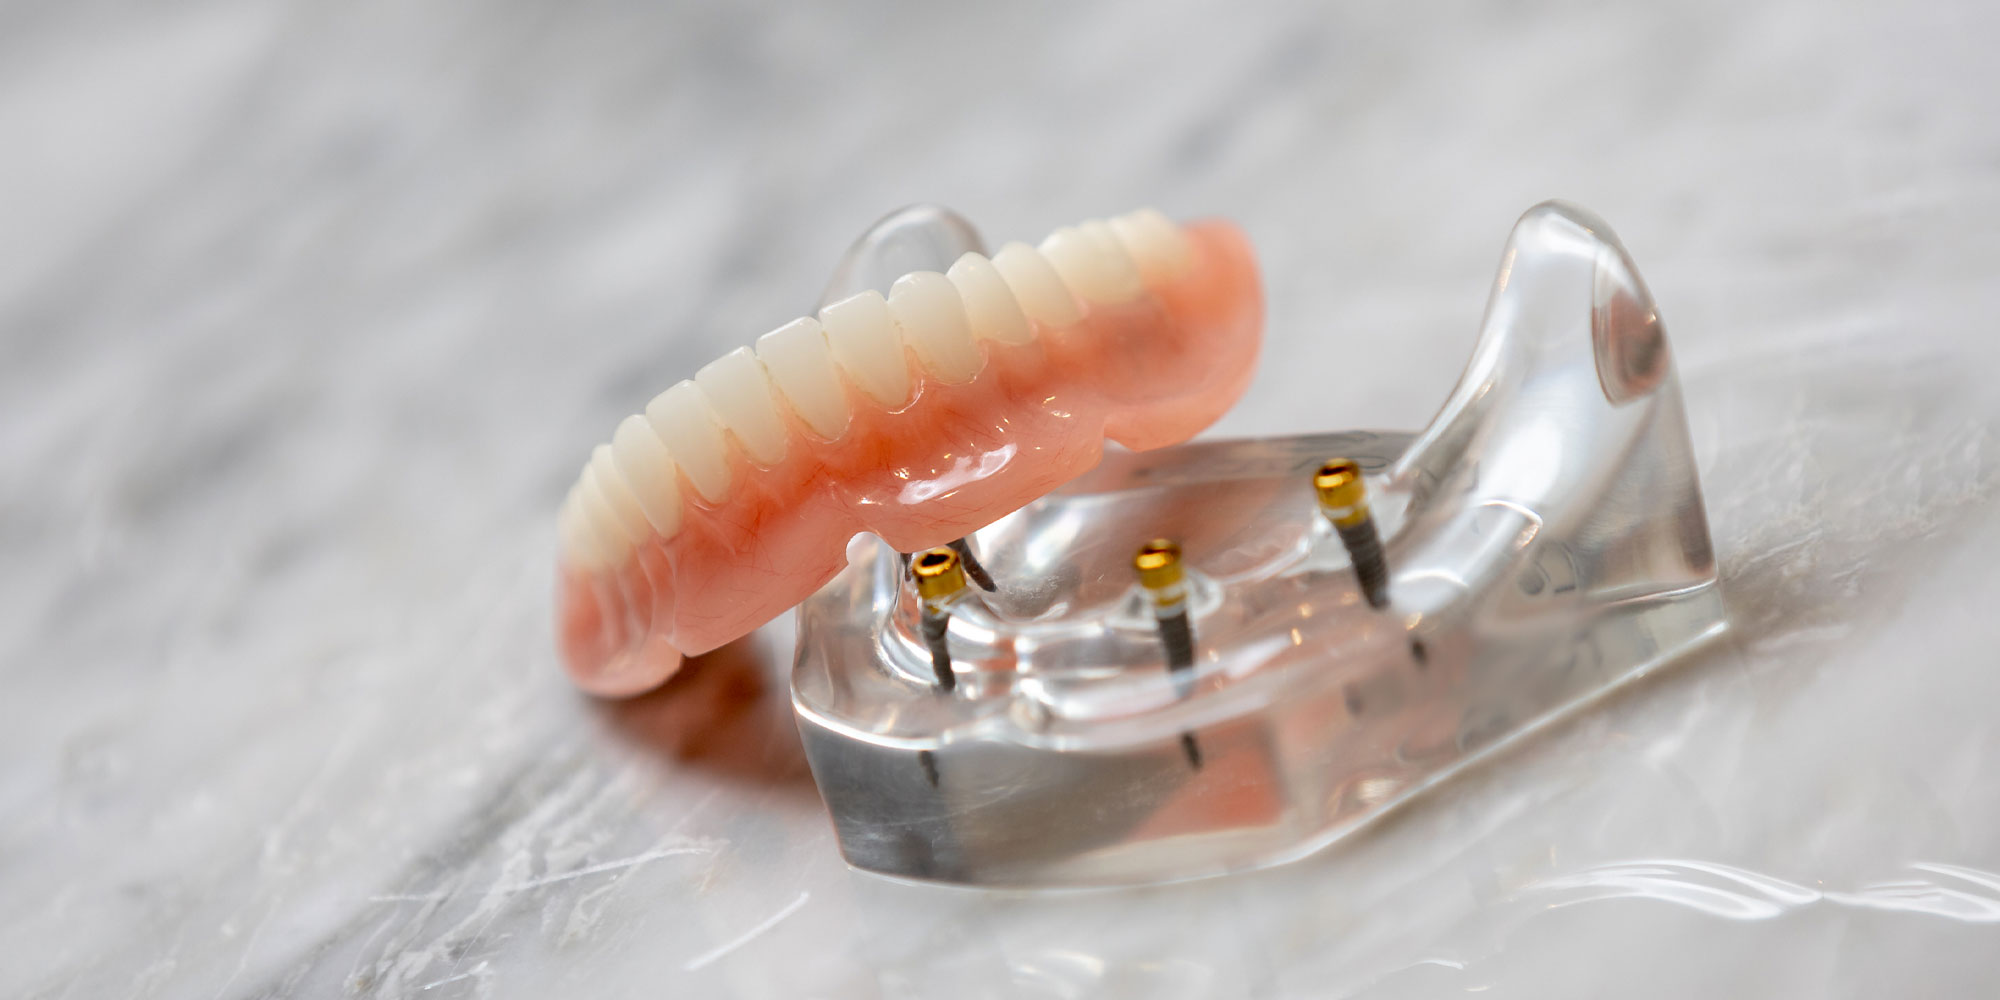 implant supported denture model being displayed